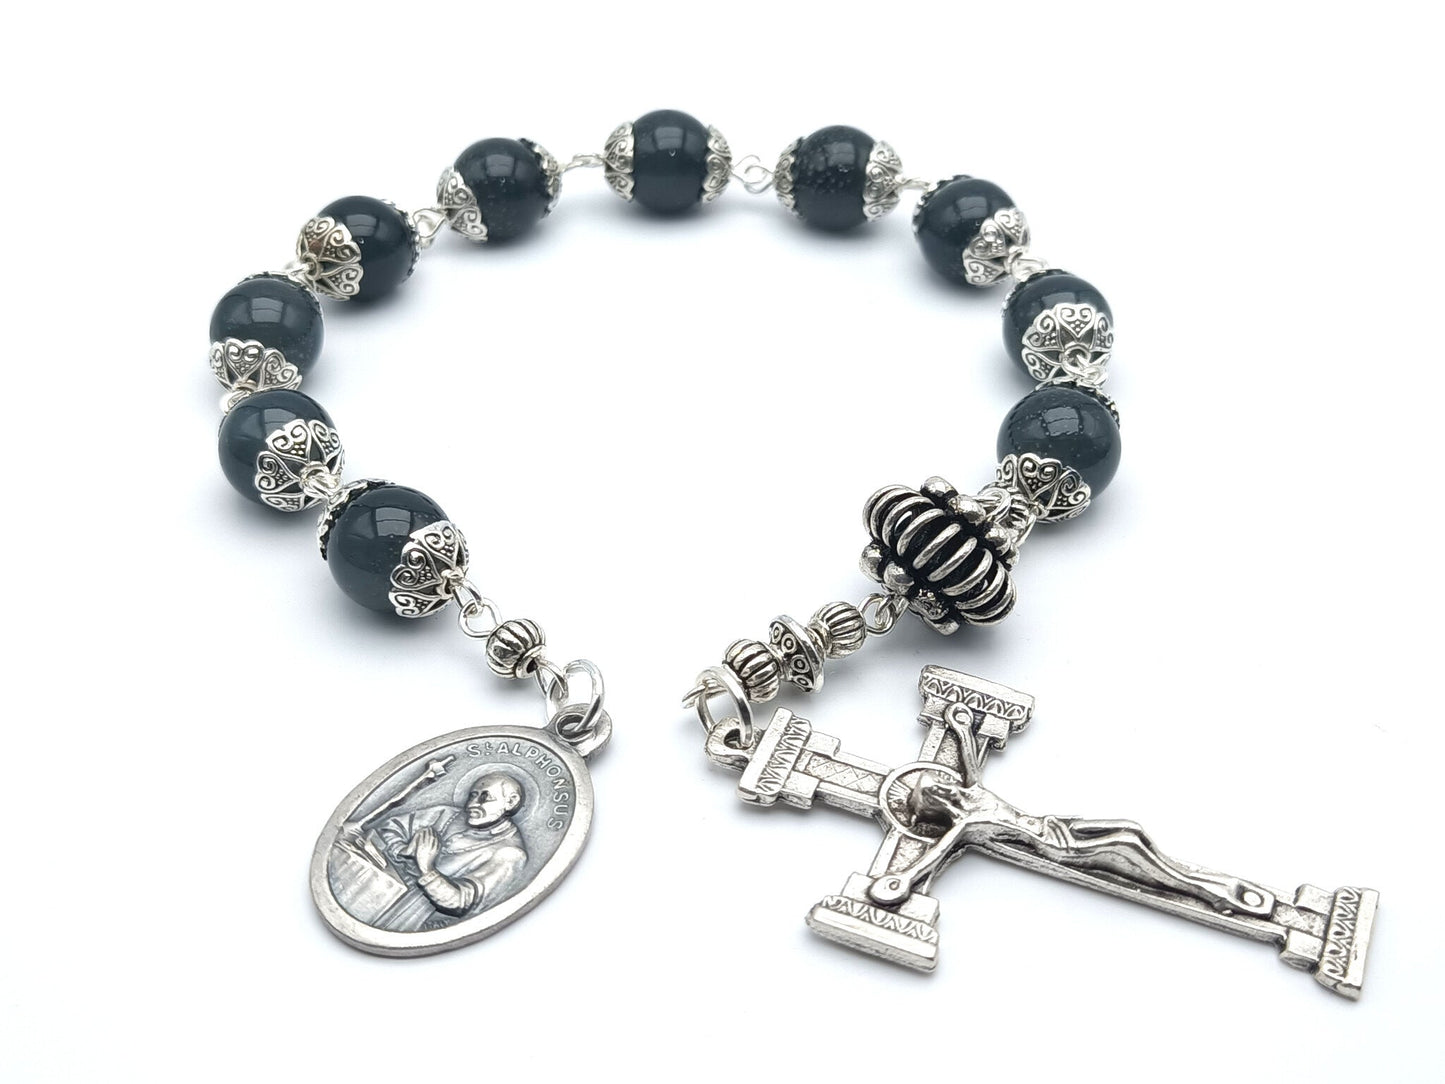 Saint Alphonsus Liguori unique rosary beads single decade or tenner rosary with blue gemstone beads, silver bead caps, pater bead, column crucifix and Saint Alphonsus medal.